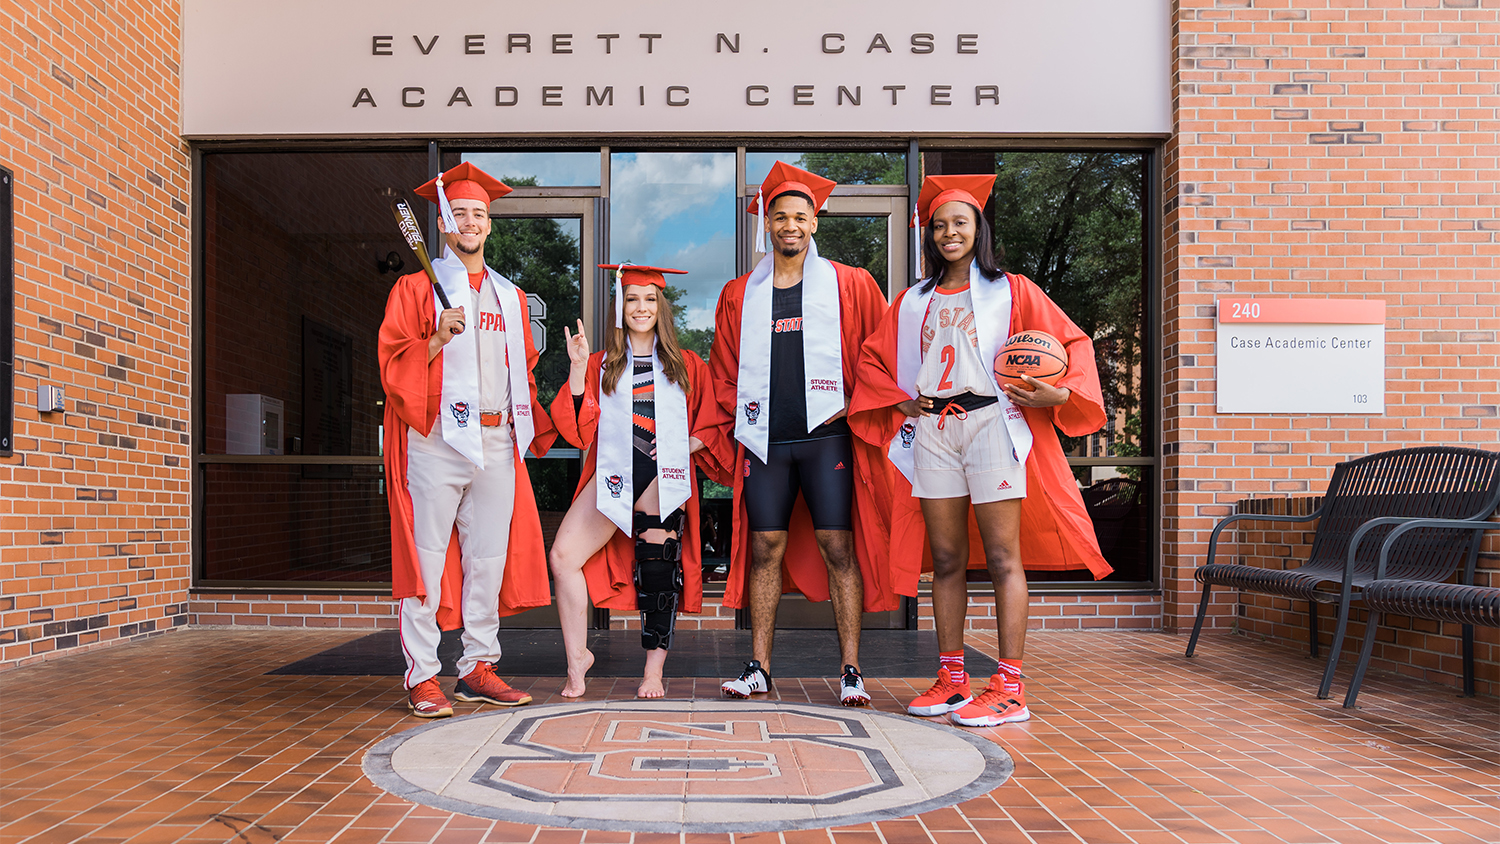 A group of four student-athletes outside the Everett N. Case Academic Center